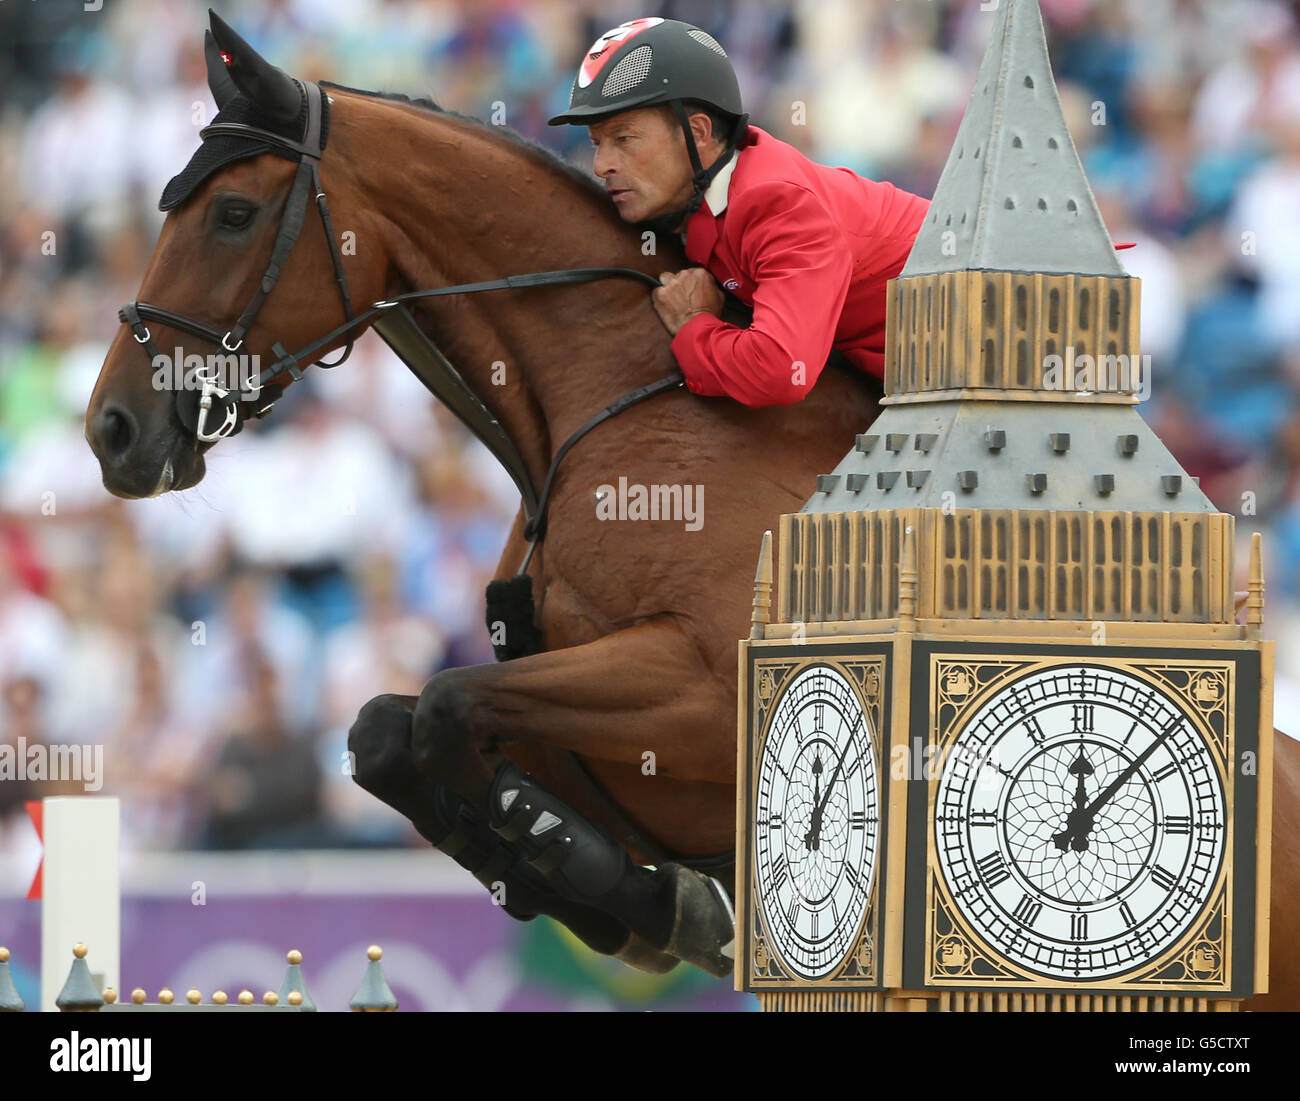 Switzerland's Pius Schwizer on Carlin IV during the Individual jumping final round a at Greenwich Park during the London 2012 Olympics Stock Photo